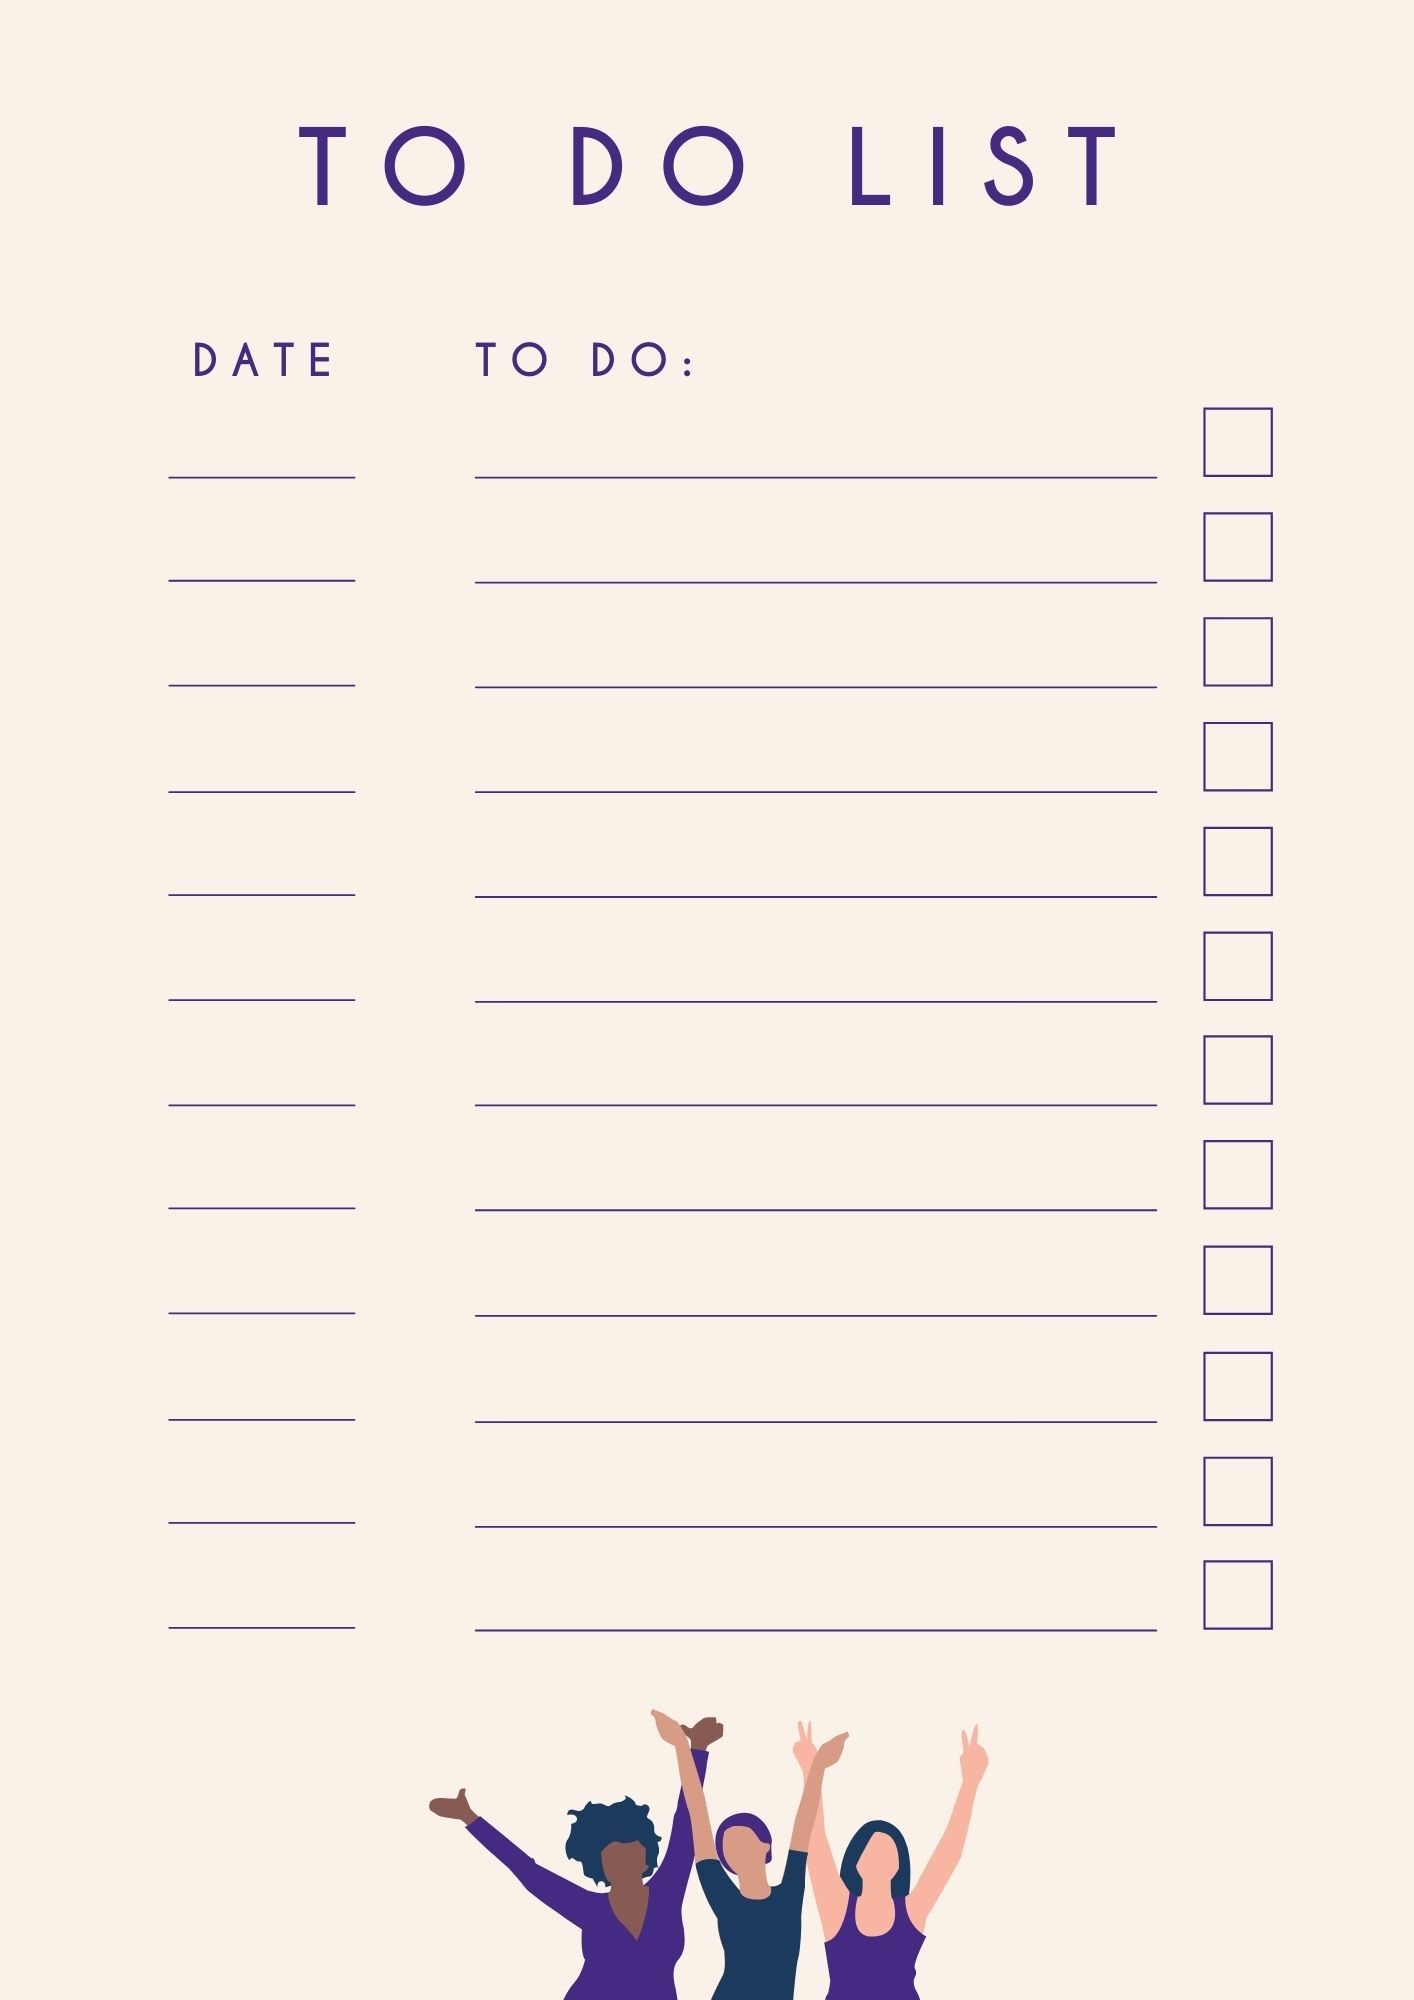 To Do List Online